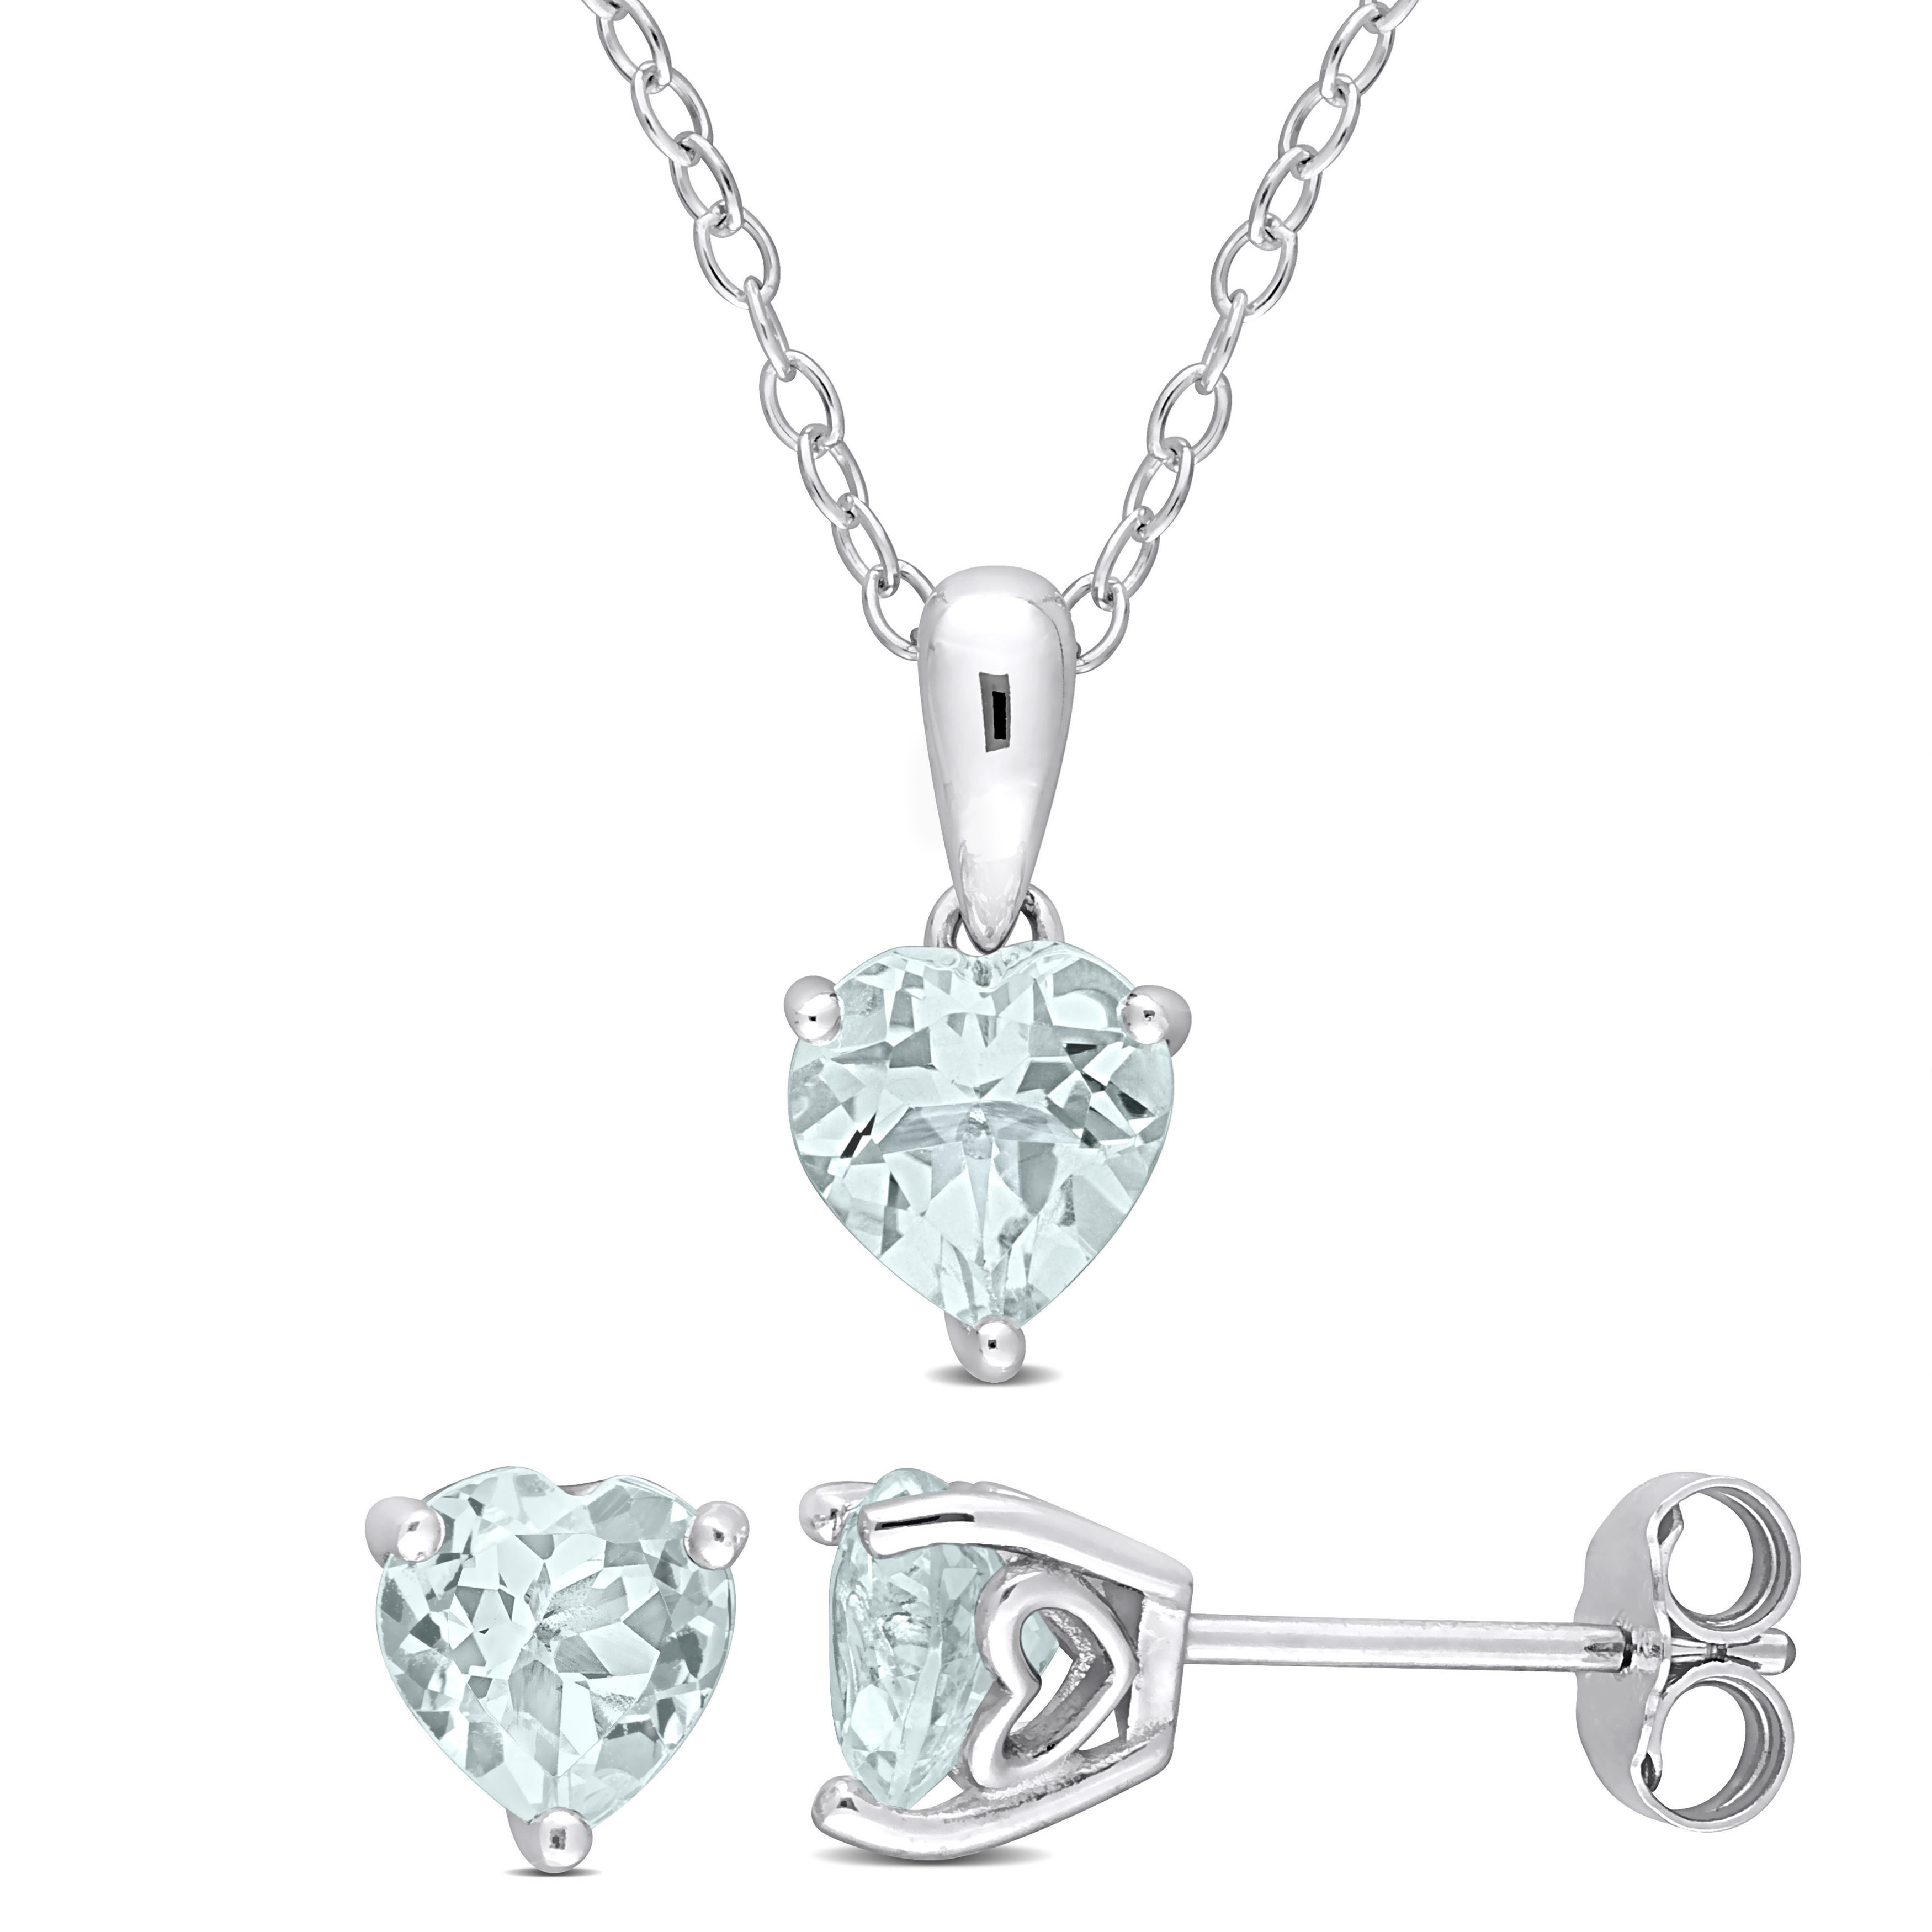 2 CT TGW Heart-Shape Aquamarine 2-Piece Set of Pendant with Chain and Earrings in Sterling Silver